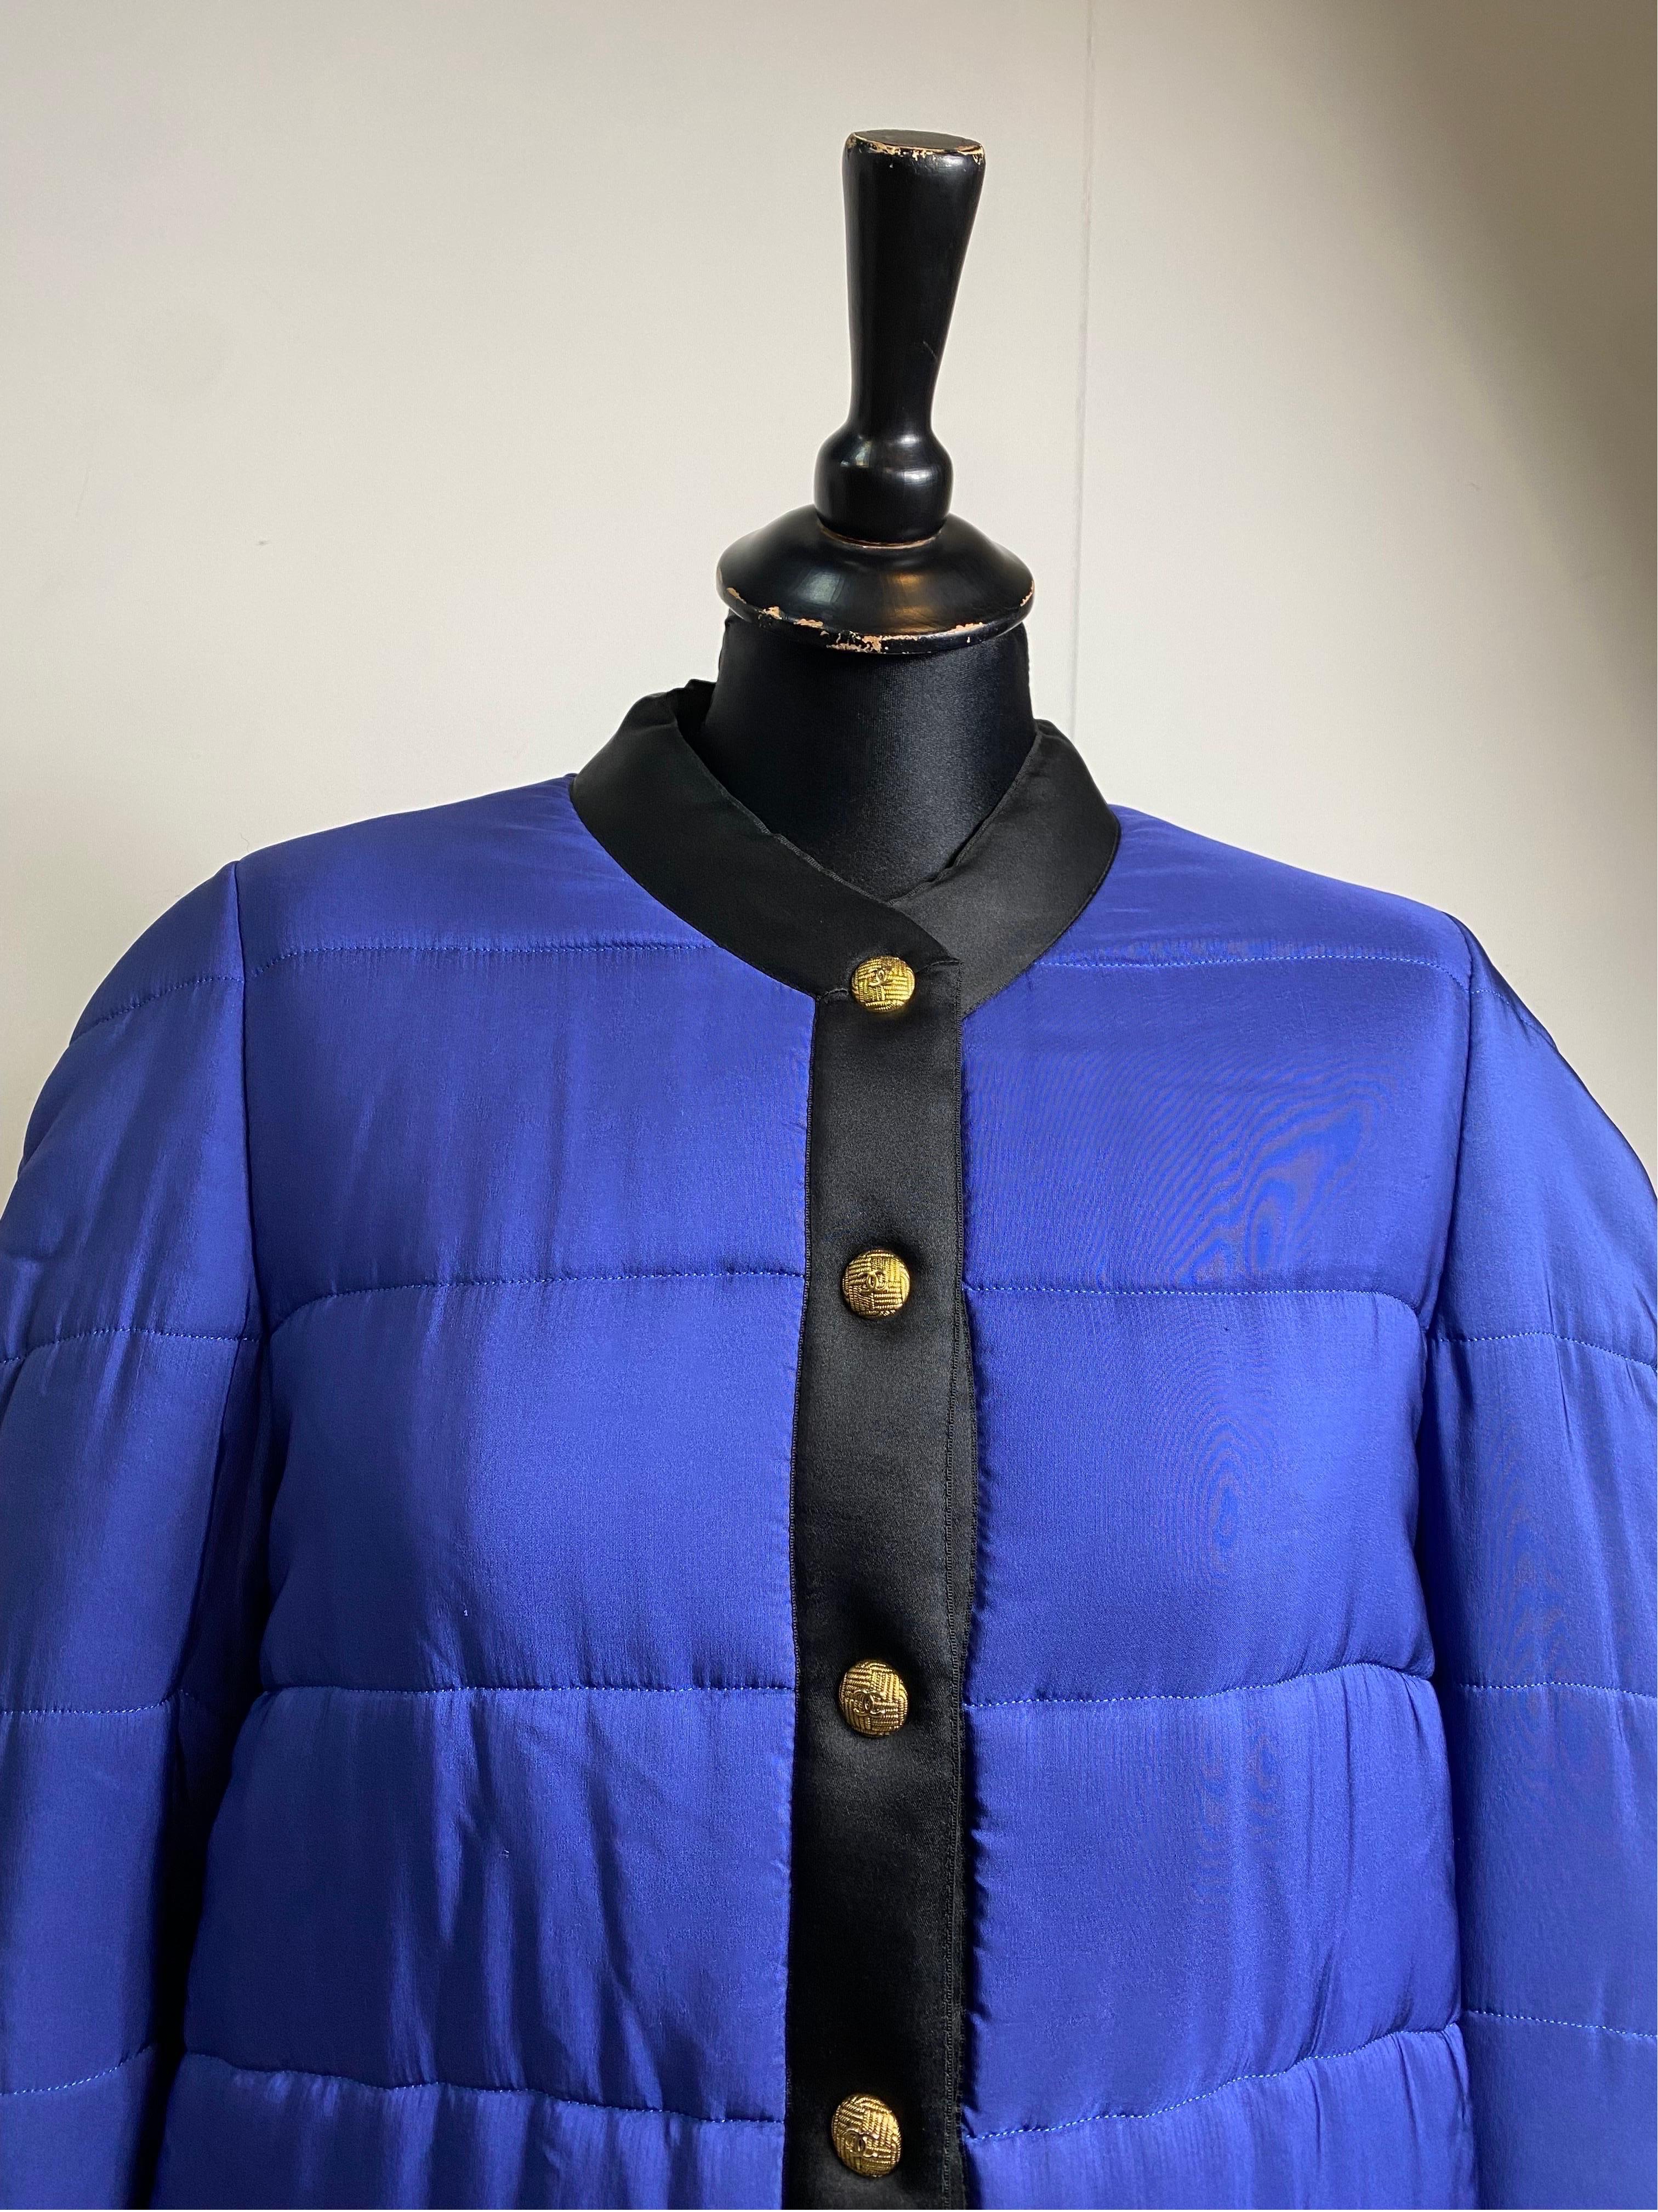 Chanel Boutique bomber jacket.
Automne-hiver 1990/91. Iconic Jacket.
Composition and size label are missing.
we think it's silk. Padded.
Electric blue color with black details.
Golden CC logo buttons.
Fits an international M.
Shoulders 48 cm
Bust 52